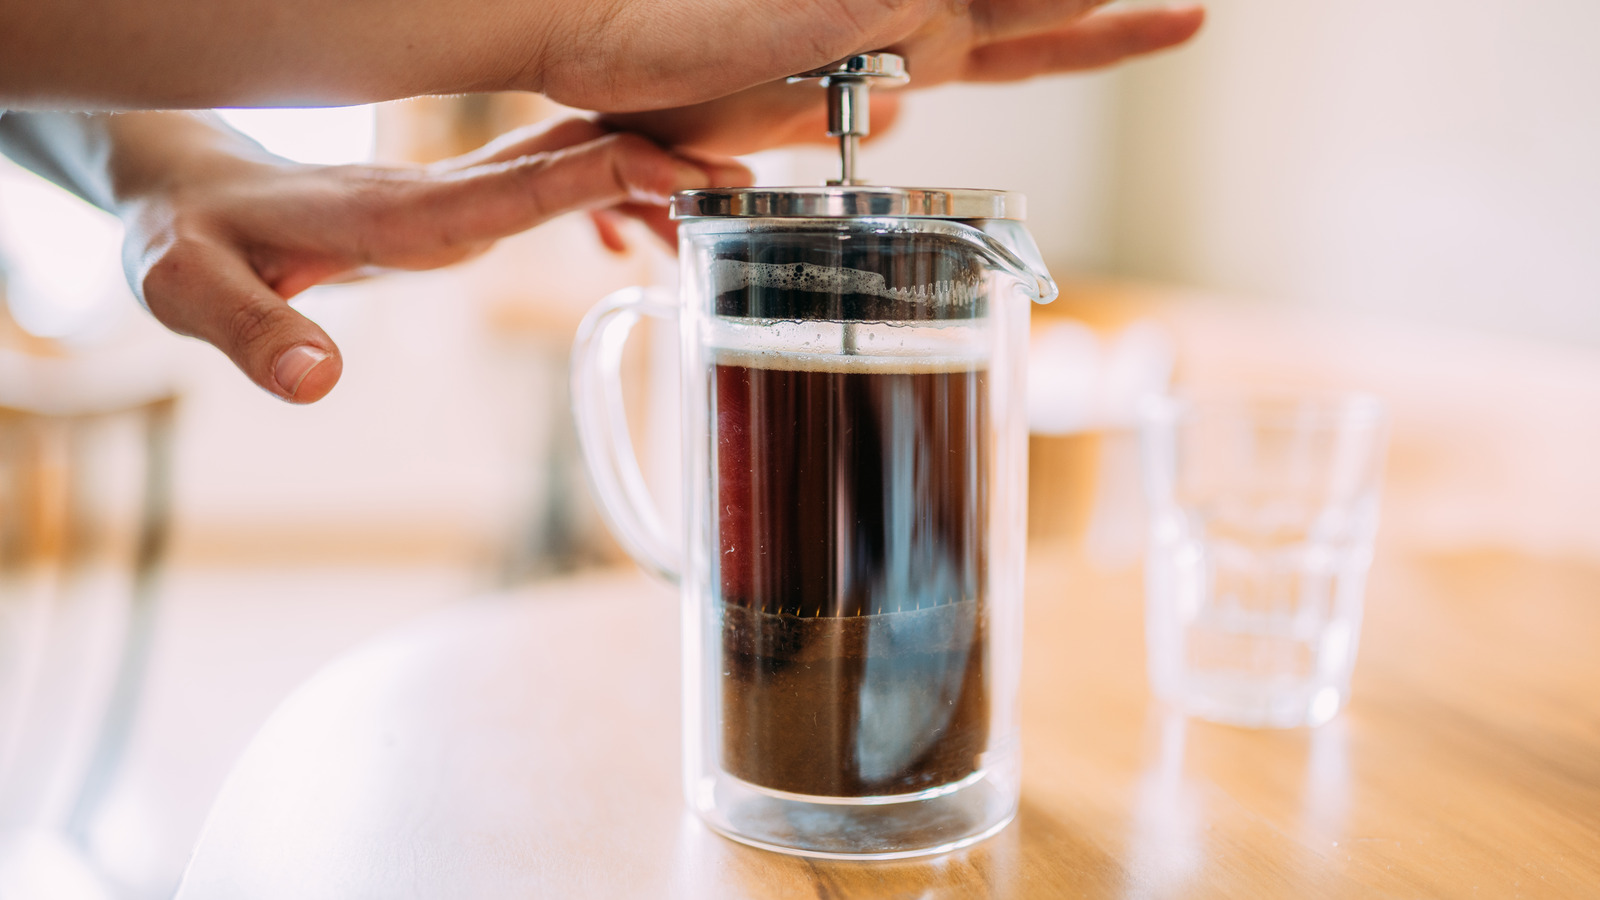 https://www.tastingtable.com/img/gallery/making-cold-brew-coffee-with-a-french-press-only-takes-one-extra-step/l-intro-1687204728.jpg